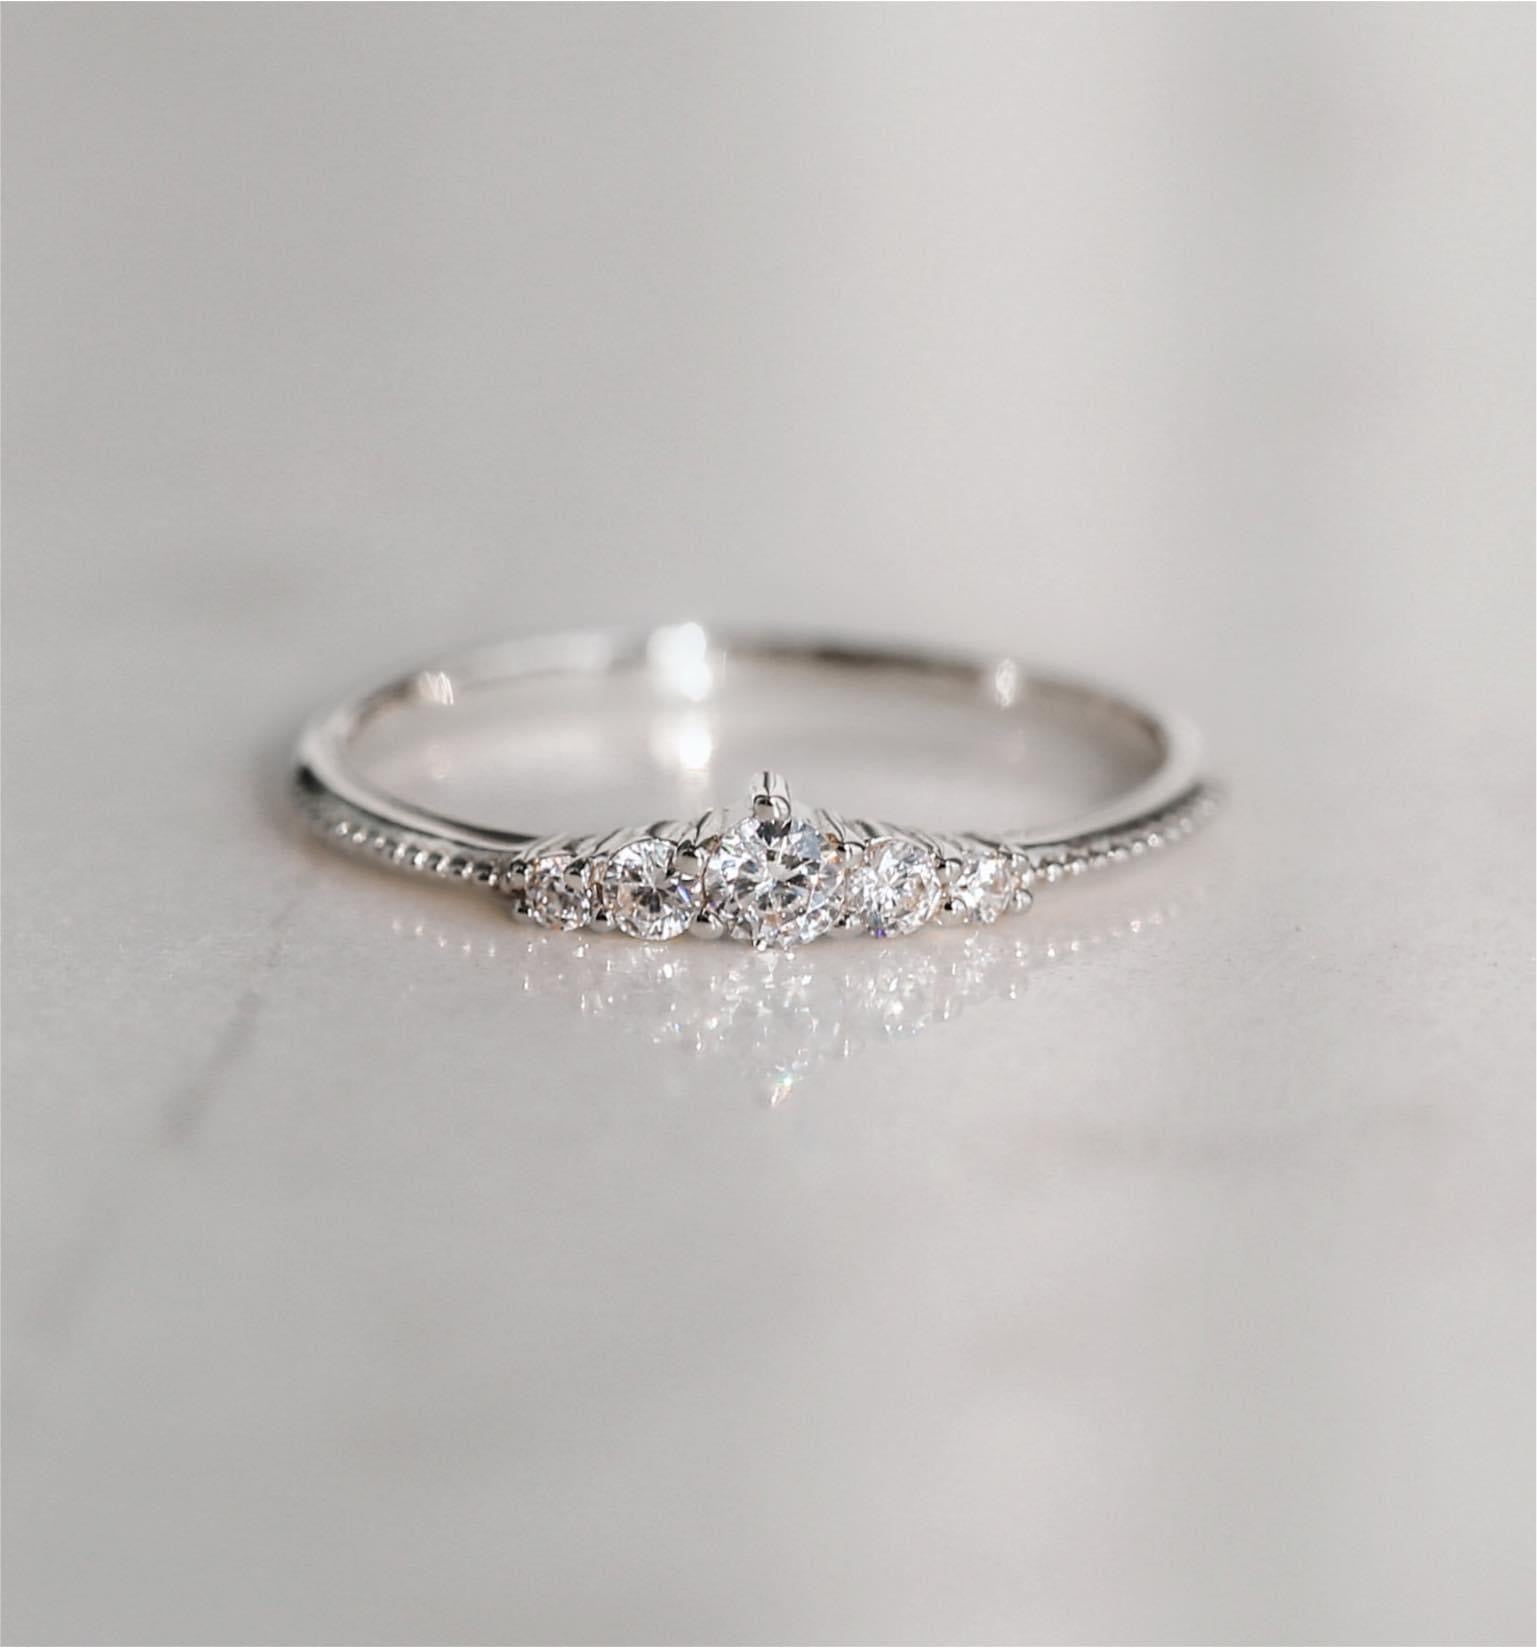 Tiny crown ring – TED&MAG JEWELRY STUDIO